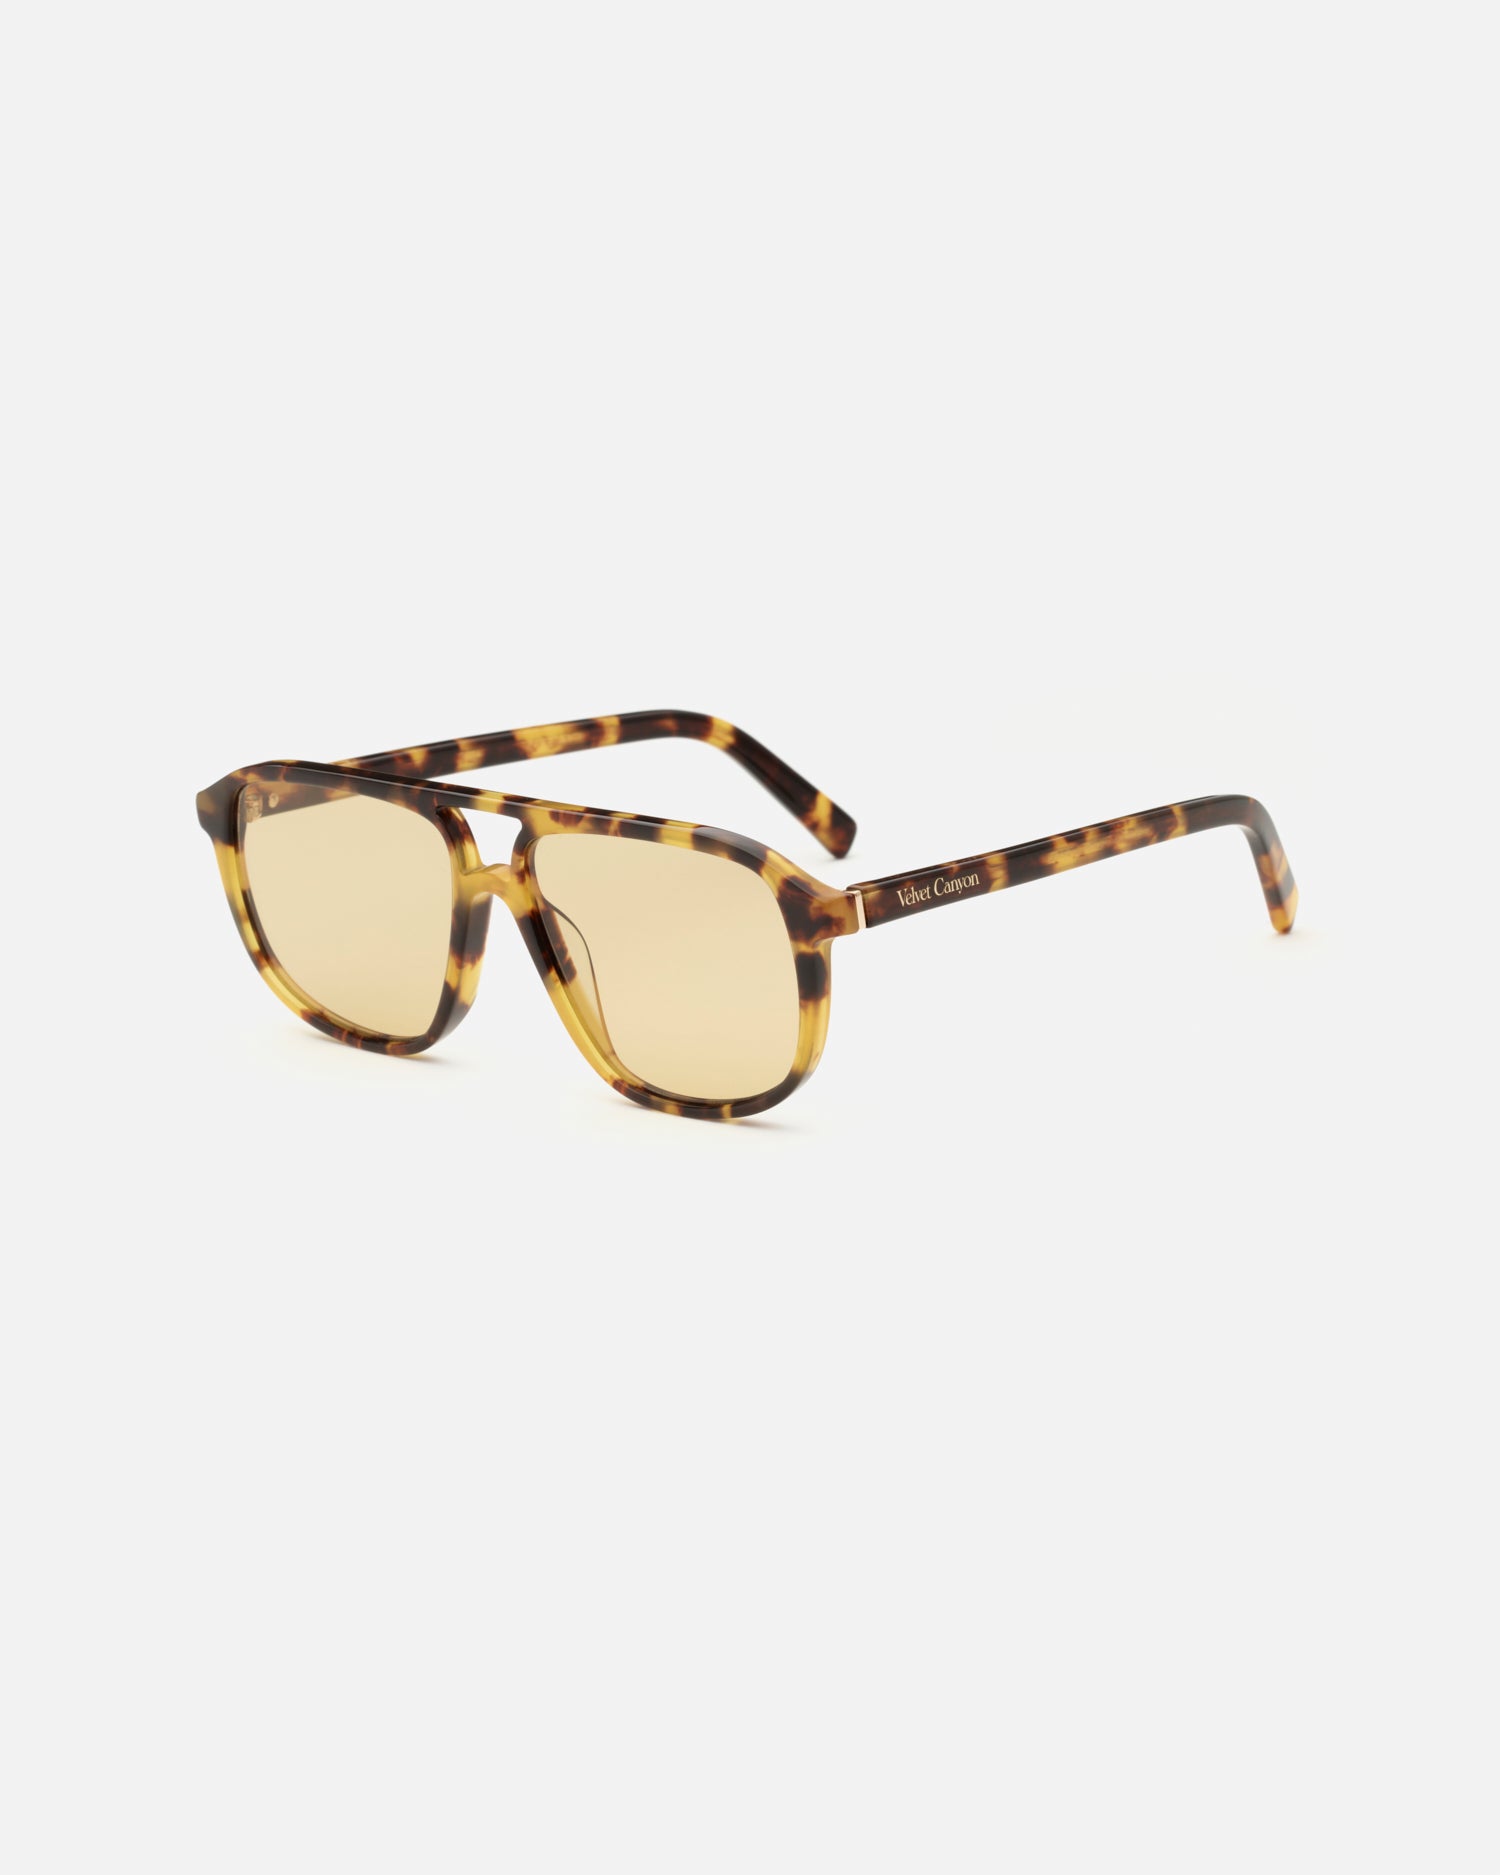 La Touriste luxe sunglasses by Velvet Canyon in Eco Tort